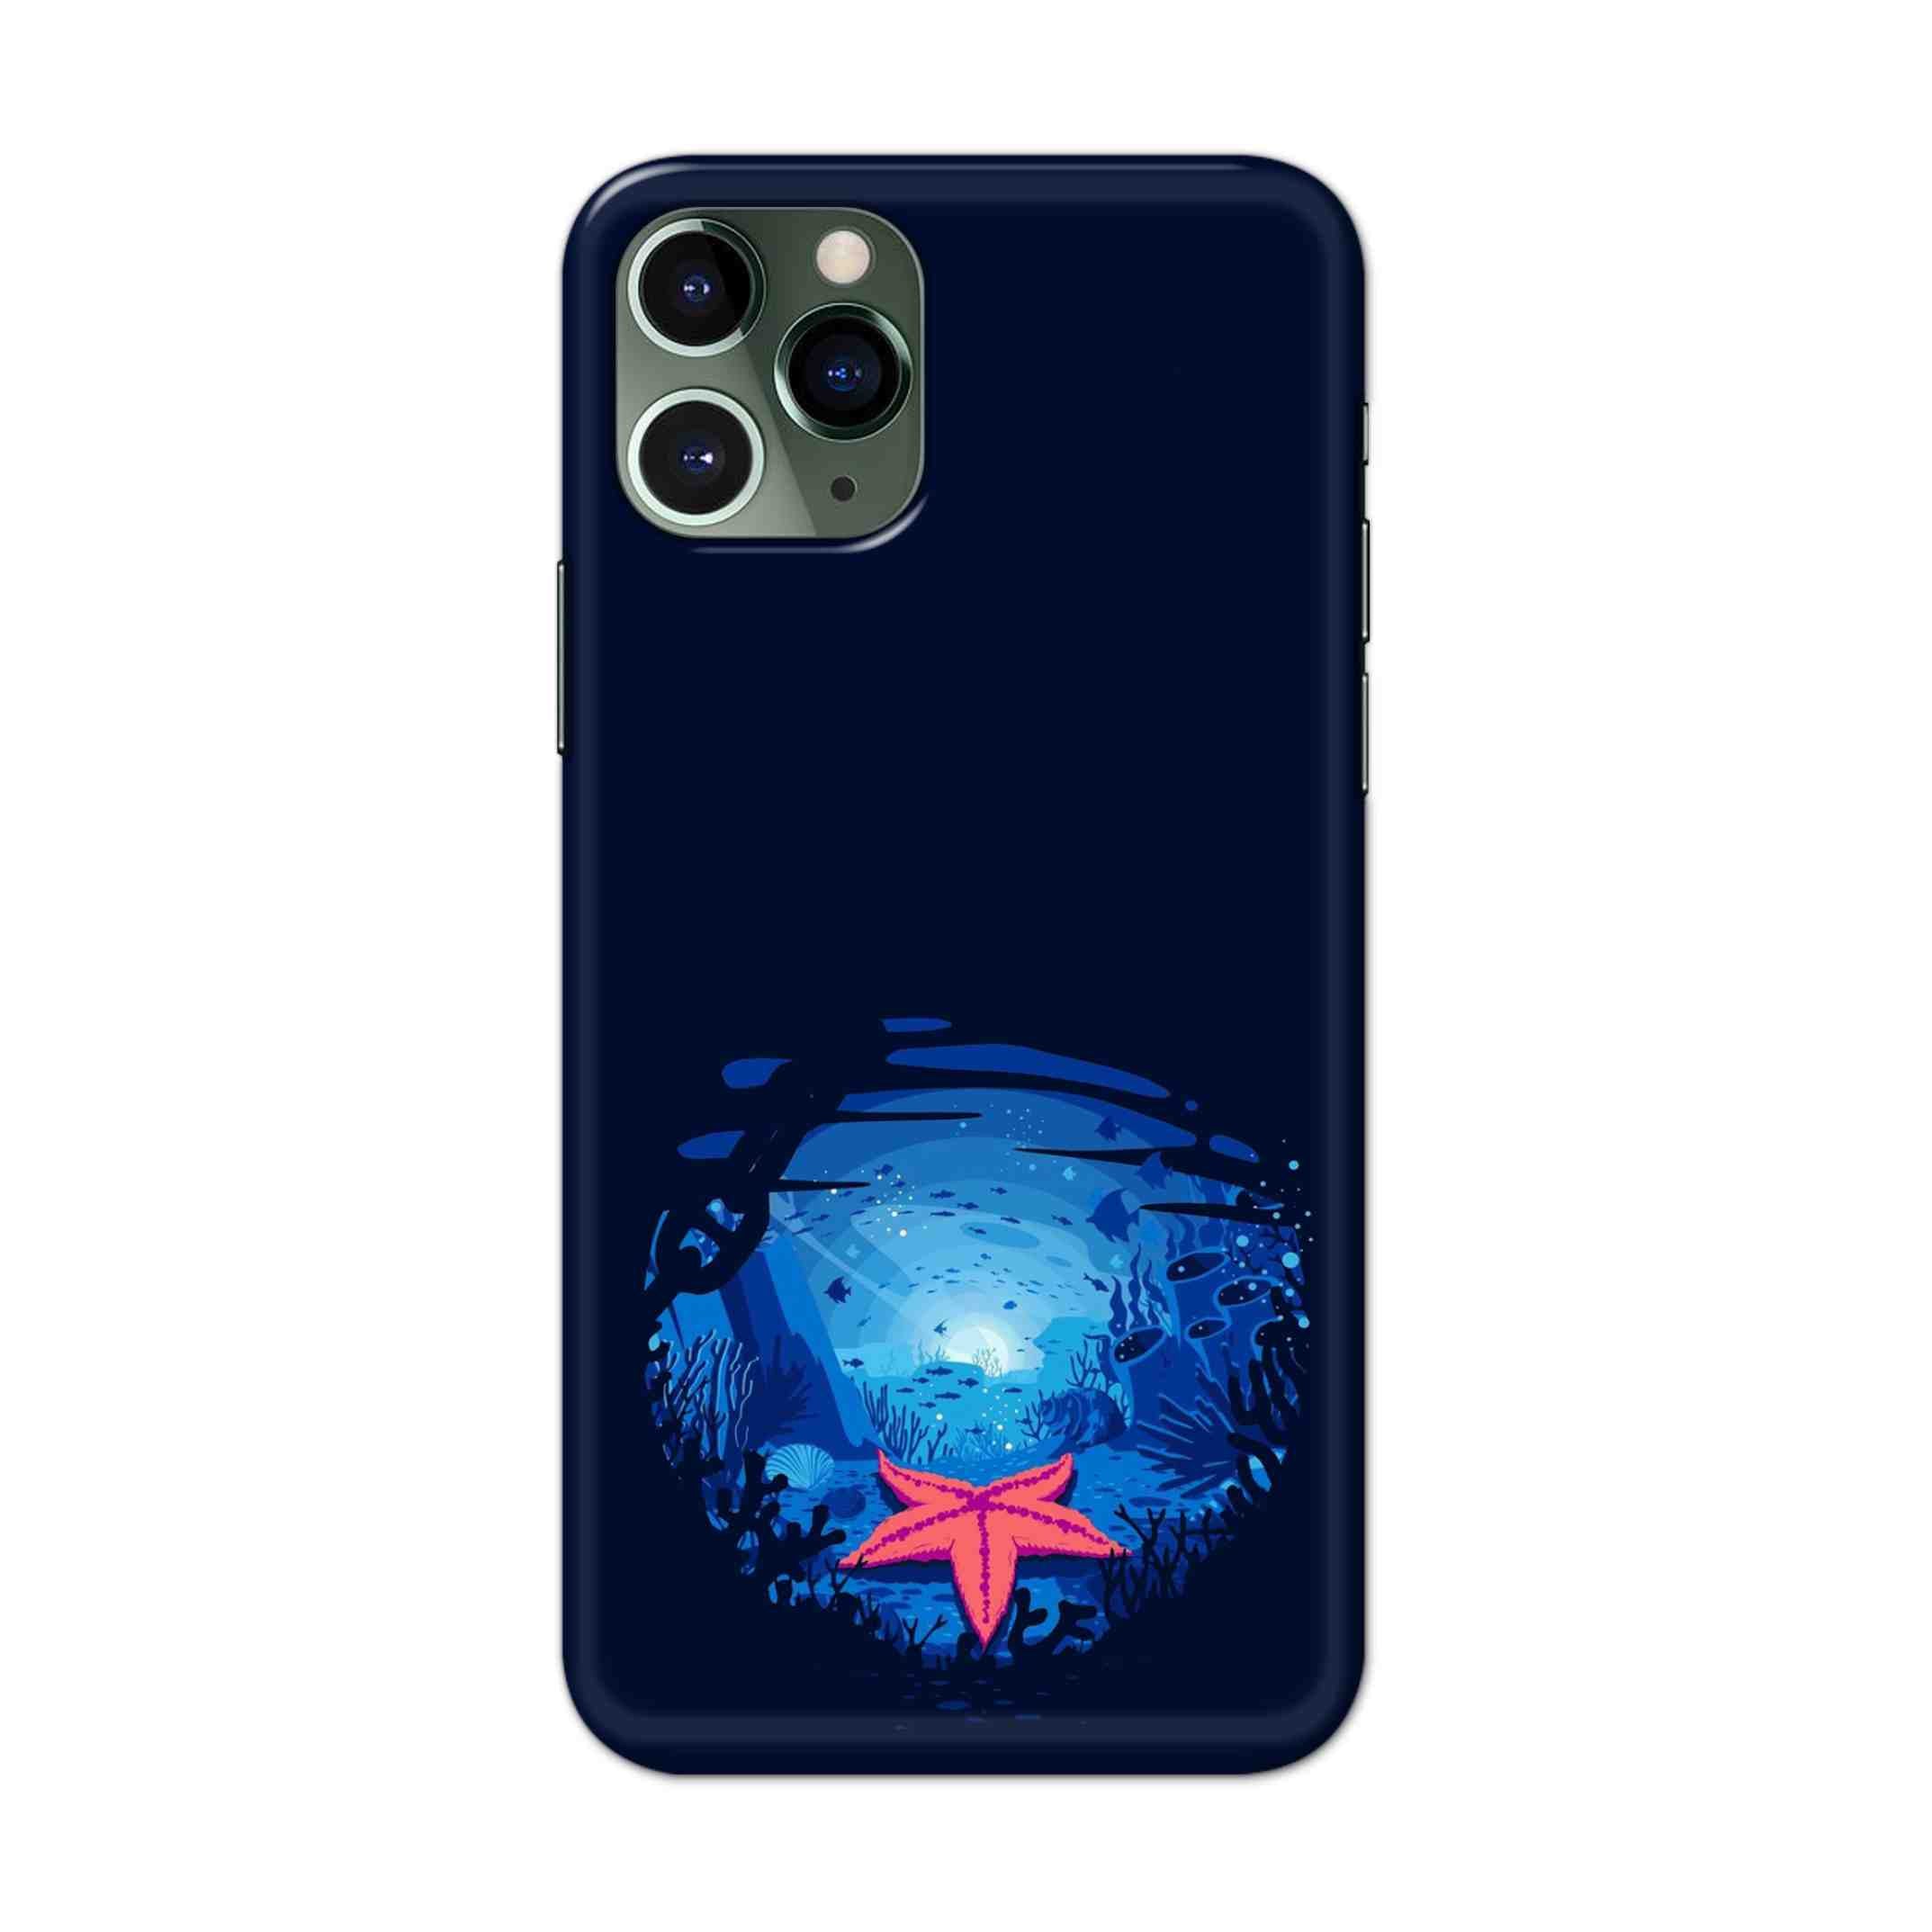 Buy Star Frish Hard Back Mobile Phone Case/Cover For iPhone 11 Pro Online